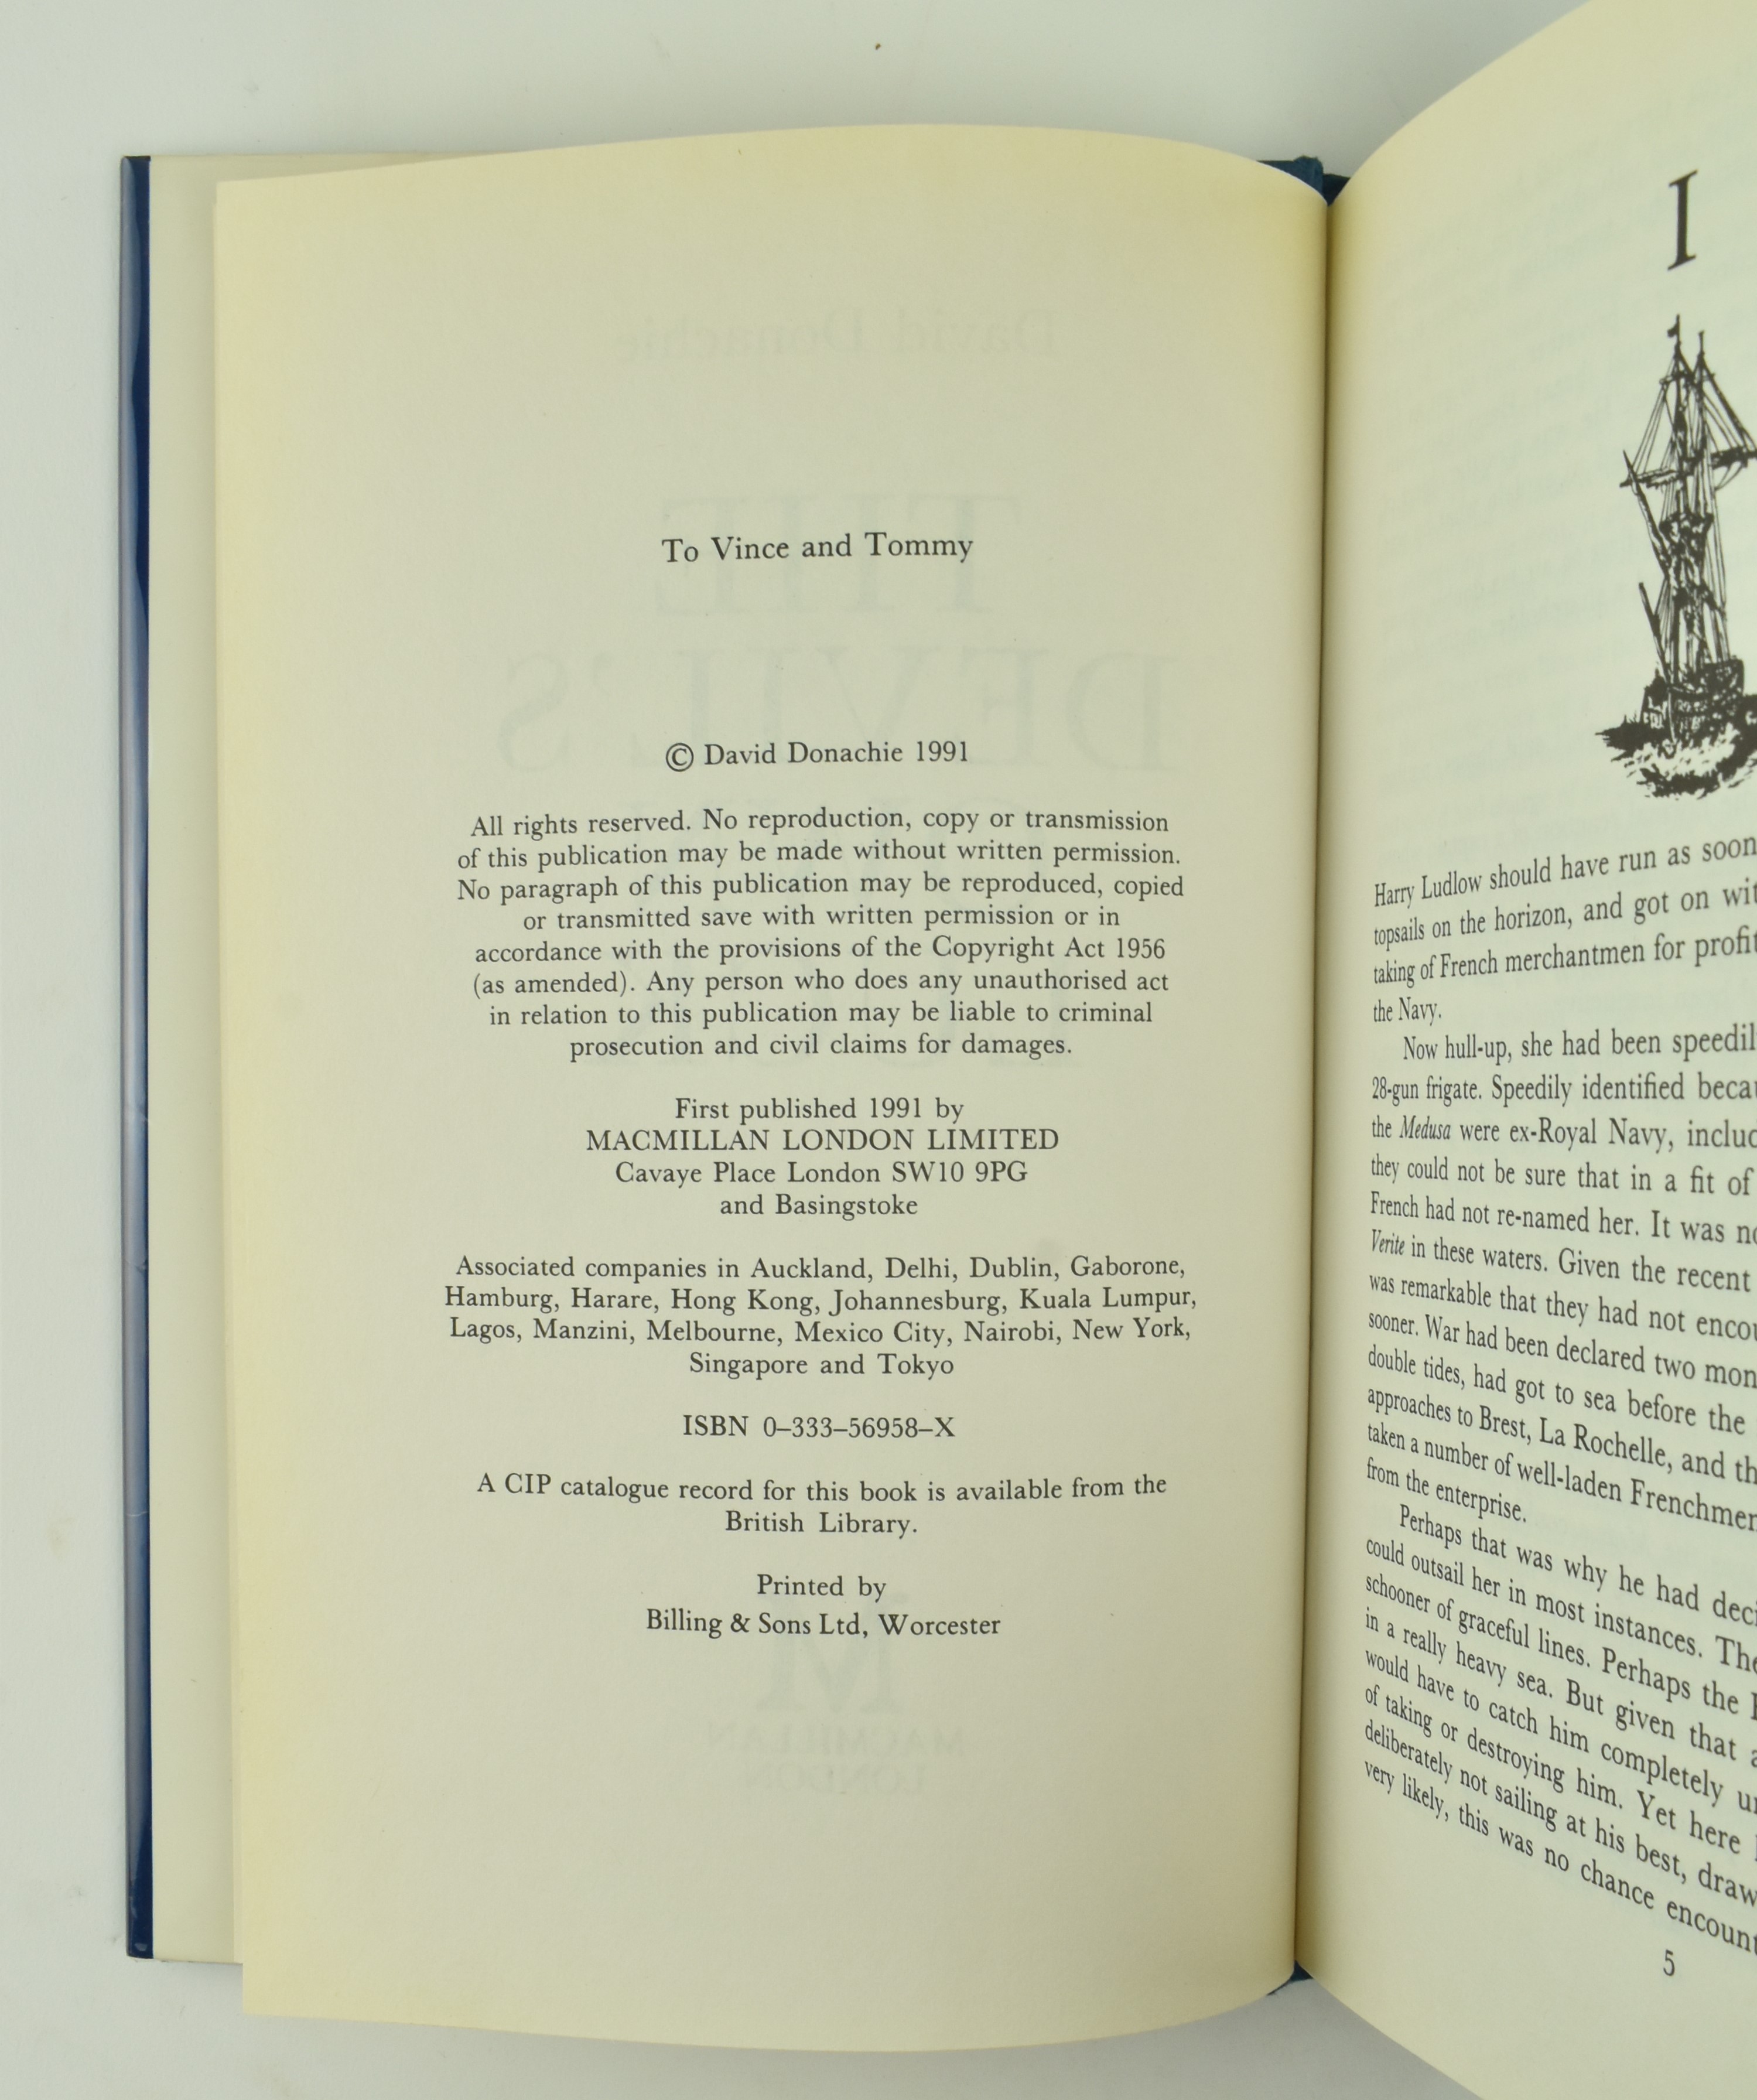 MODERN FIRST EDITIONS. COLLECTION OF FIRST & EARLY EDITIONS - Image 6 of 15